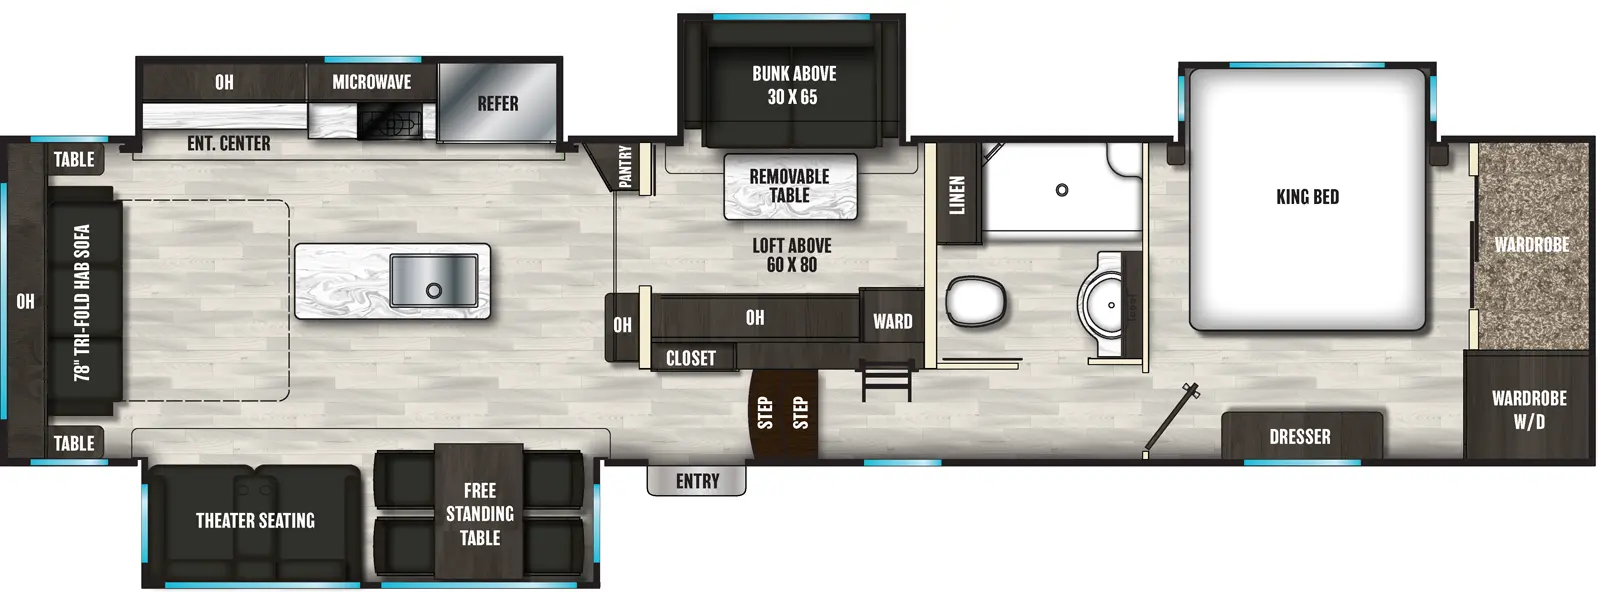 The 398MBL has four slideouts and one entry. Interior layout front to back: front bedroom with off-door side king bed slideout, front wardrobe with washer and dryer, and door side dresser; off-door side full bathroom with linen closet; ladder to loft above mid room; two steps down to entry and closet; off-door side room overhead cabinet and wardrobe along inner wall opposite the off-door side slideout with bunk above and removeable table; door side slide out containing free standing table and theater seating; kitchen island with sink; off-door side pantry and slide out with refrigerator, microwave, overhead cabinets, and entertainment center; rear tri-fold sofa with overhead cabinet and tables on each side.